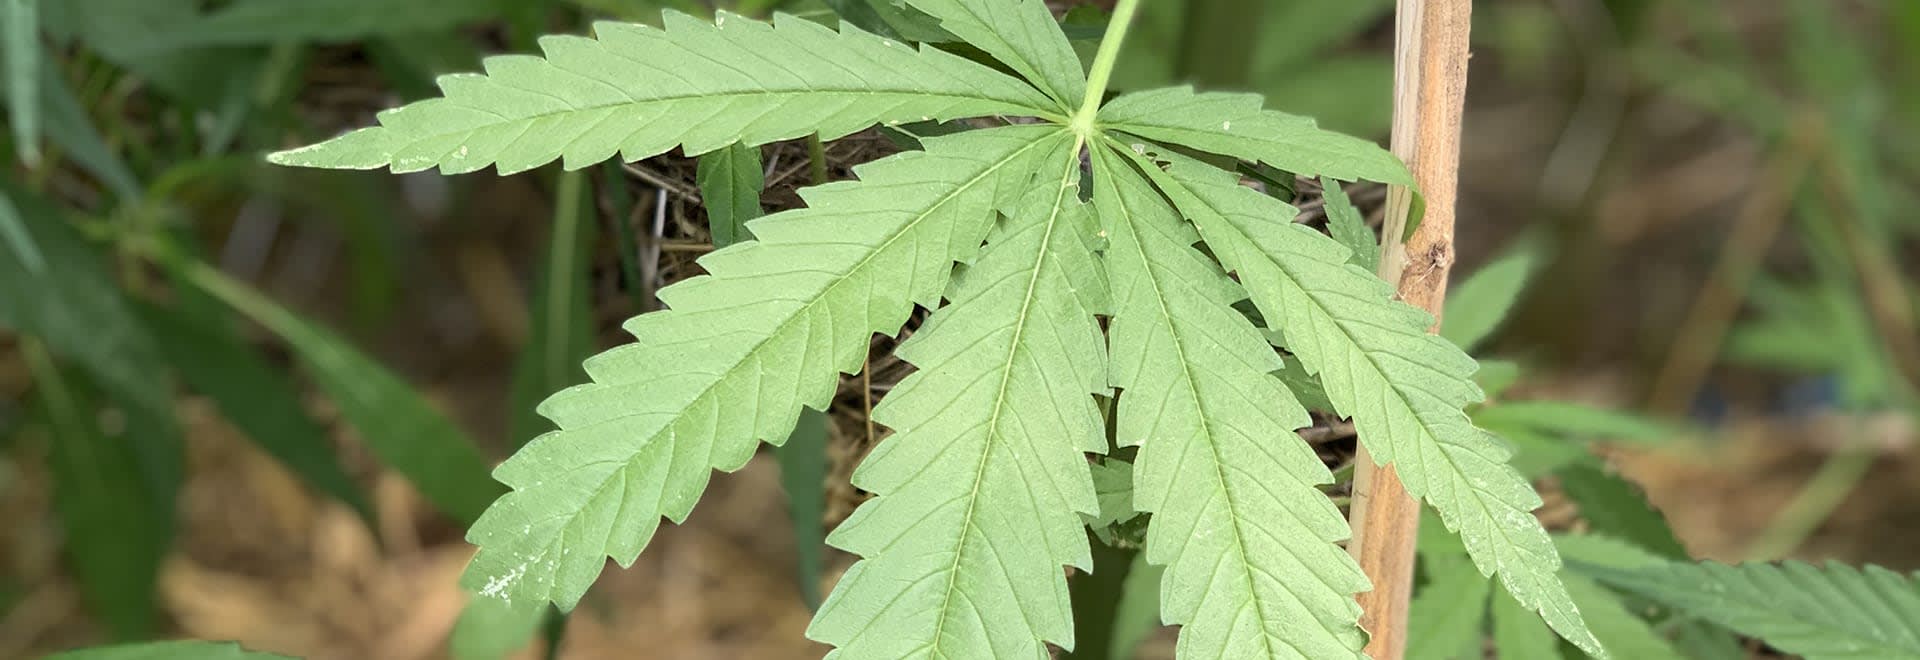 A photo of hemp leaves zoomed in